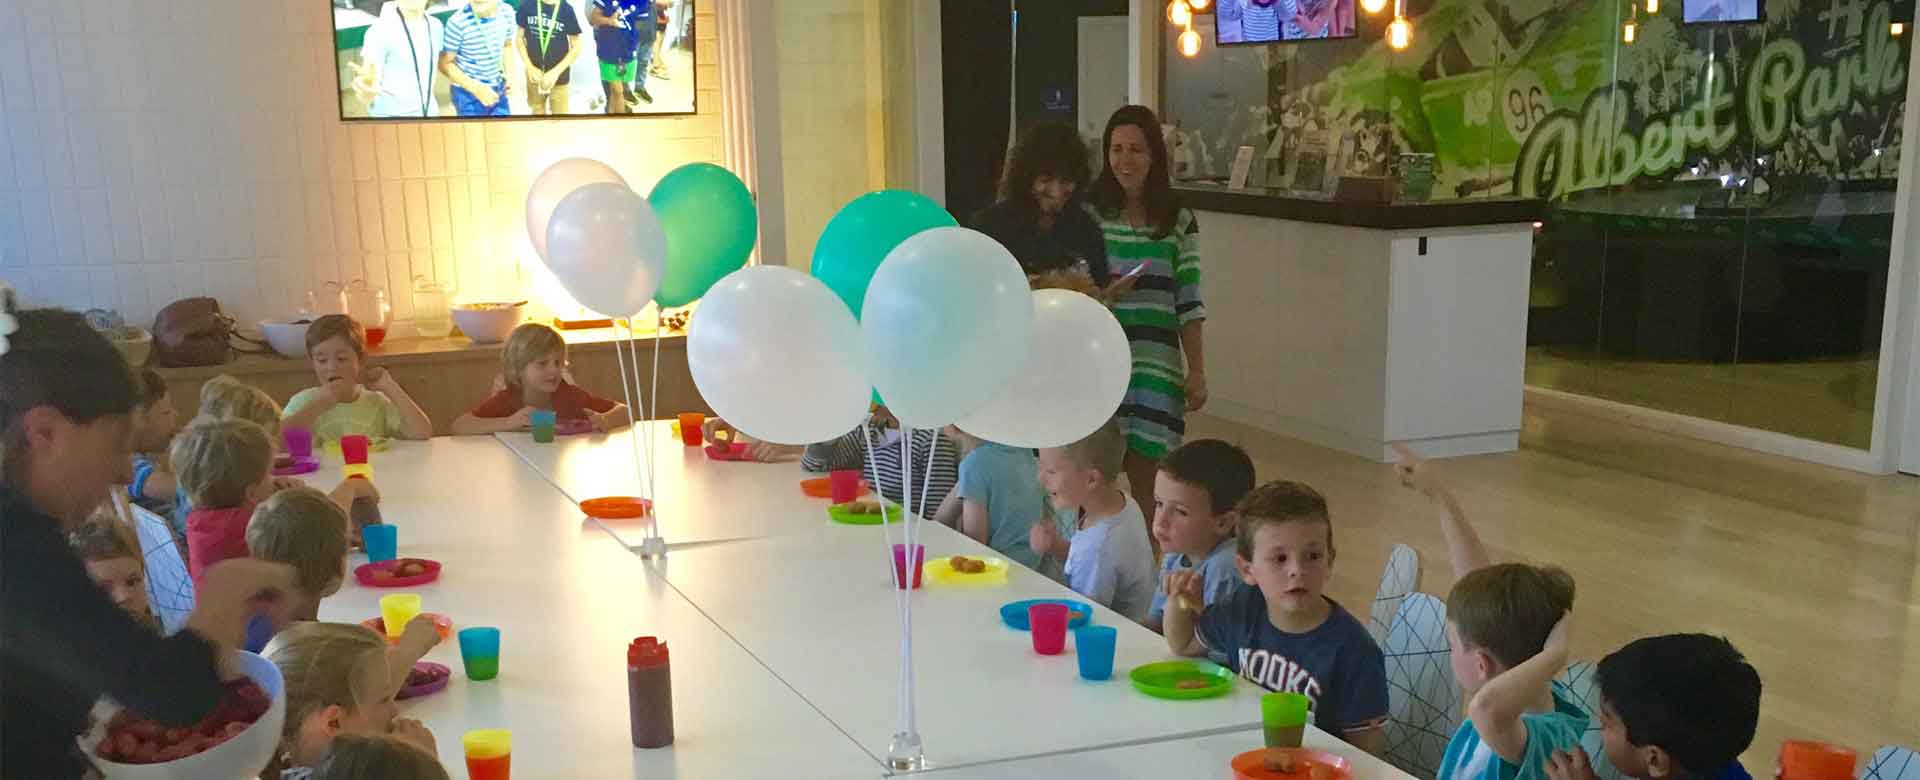  We take the hassle out of children's parties   Book Now  